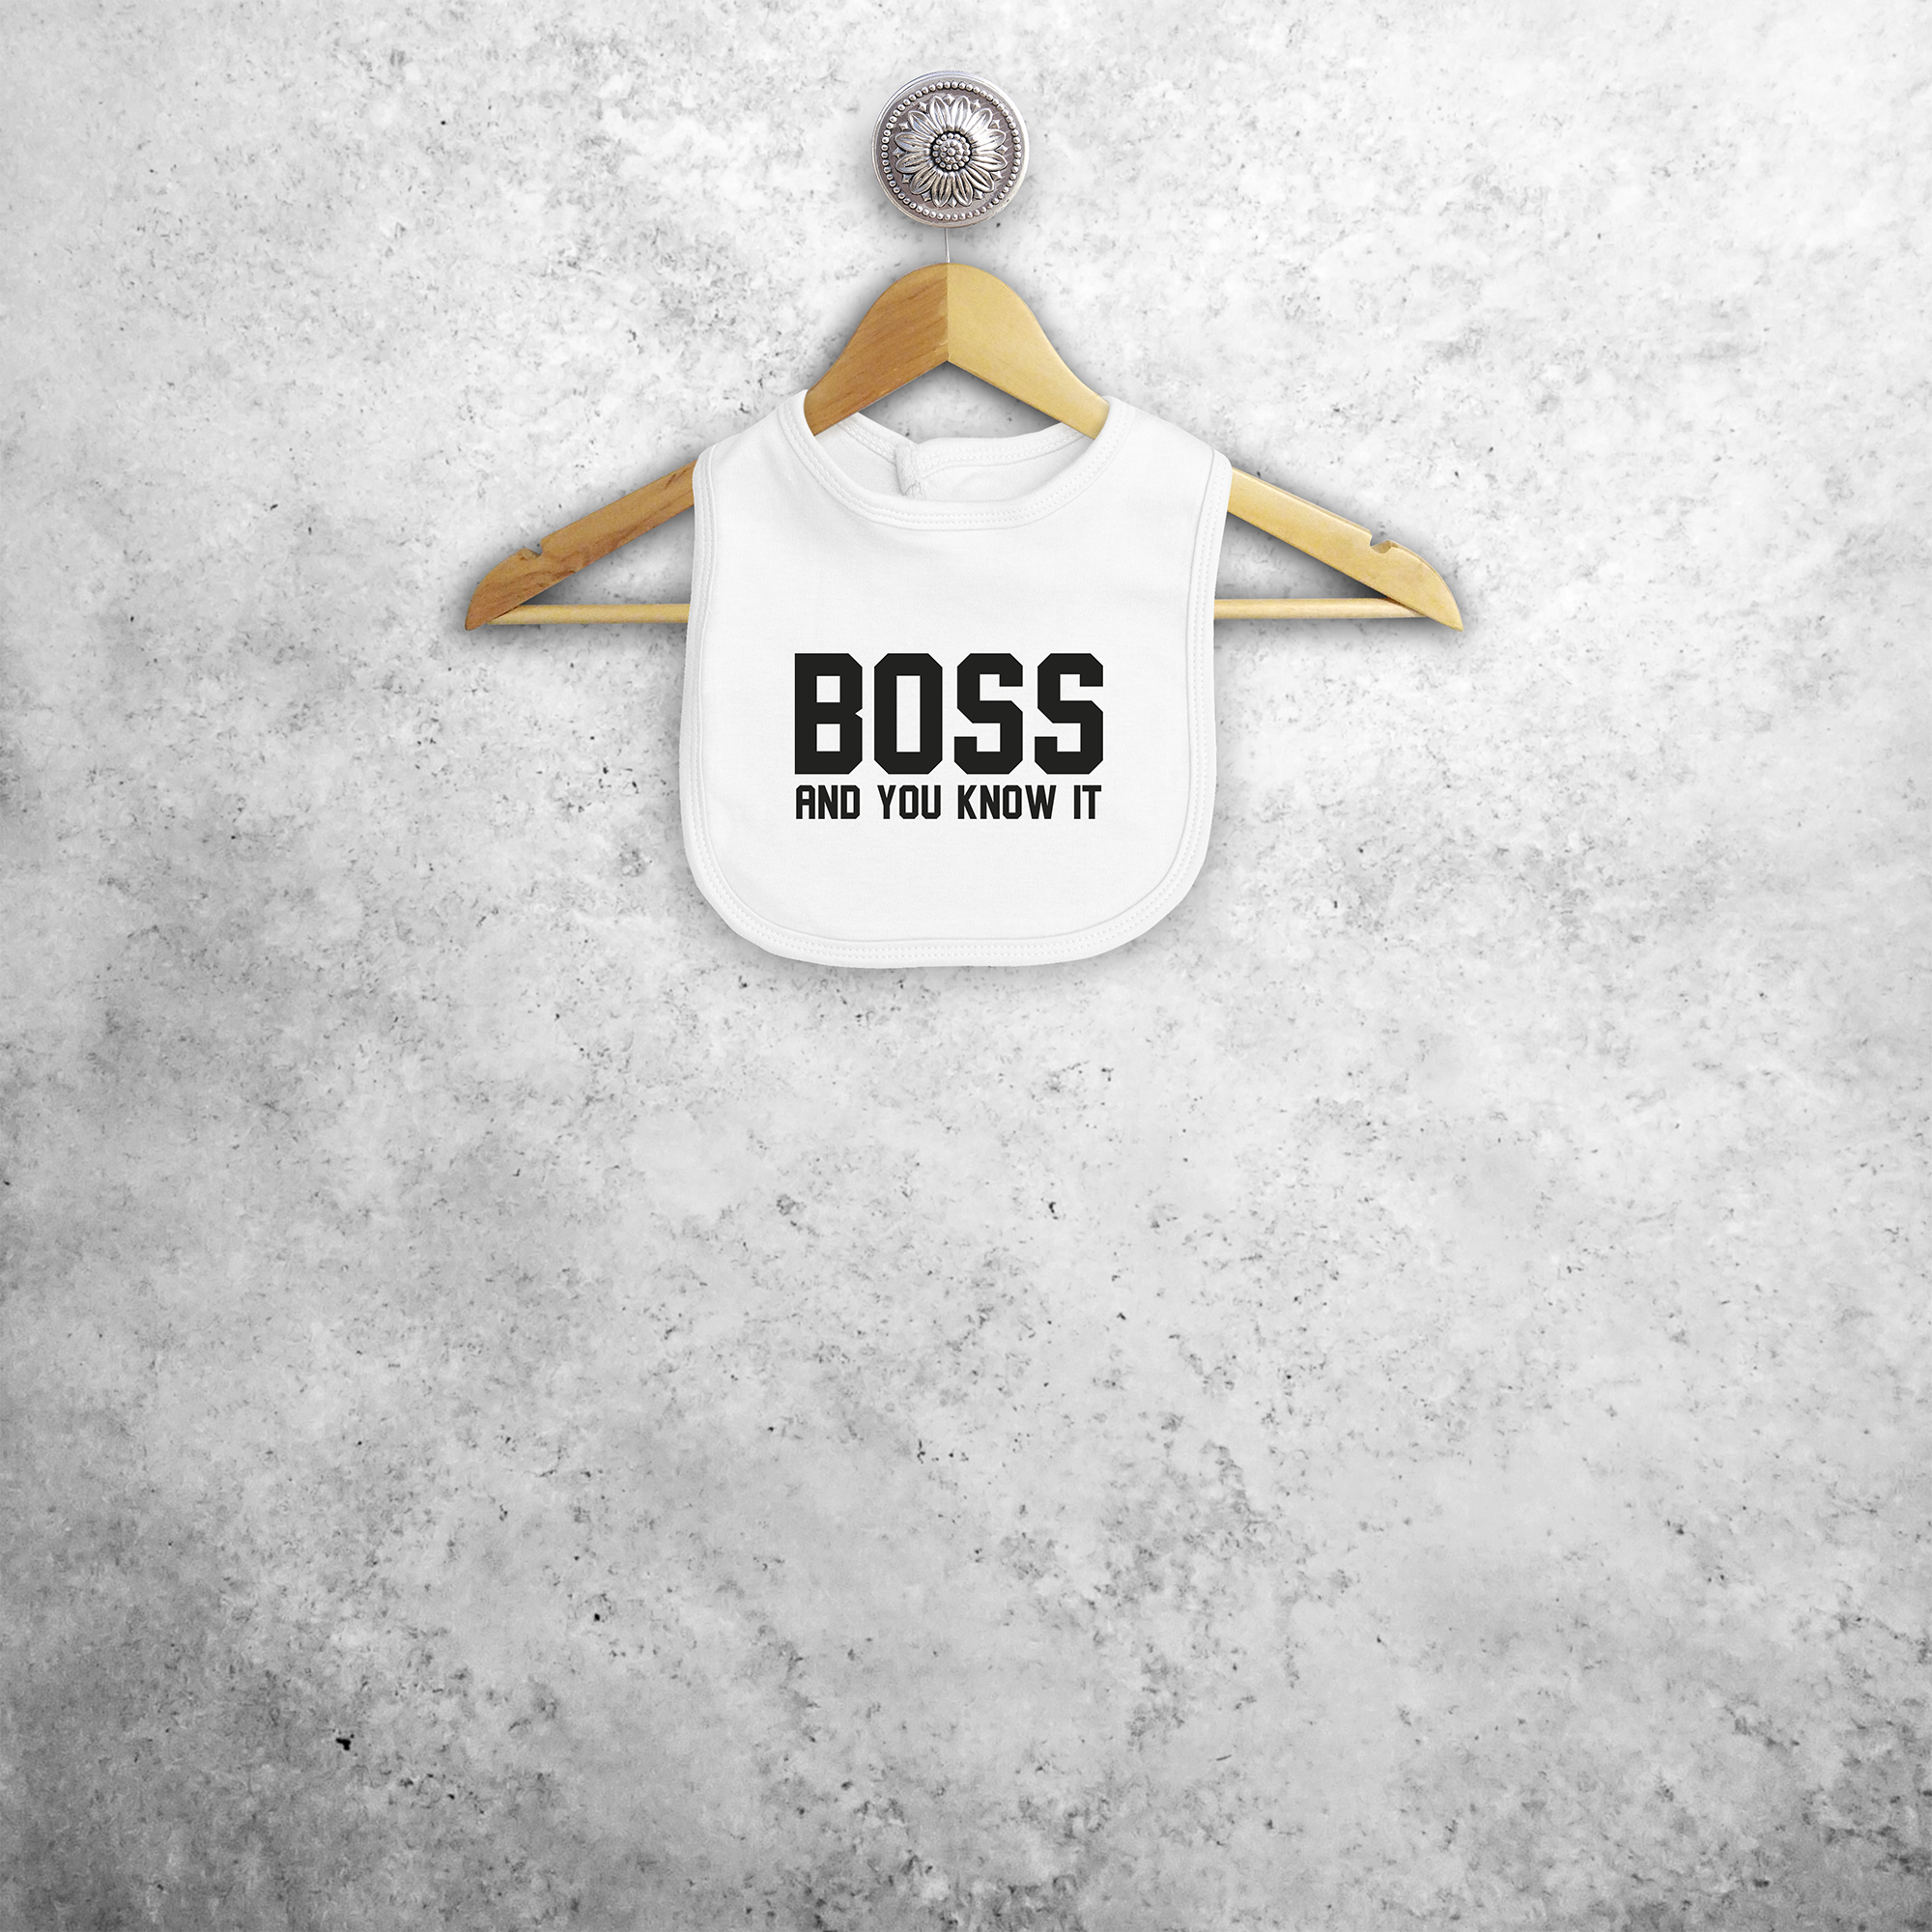 'Boss and you know it' baby bib